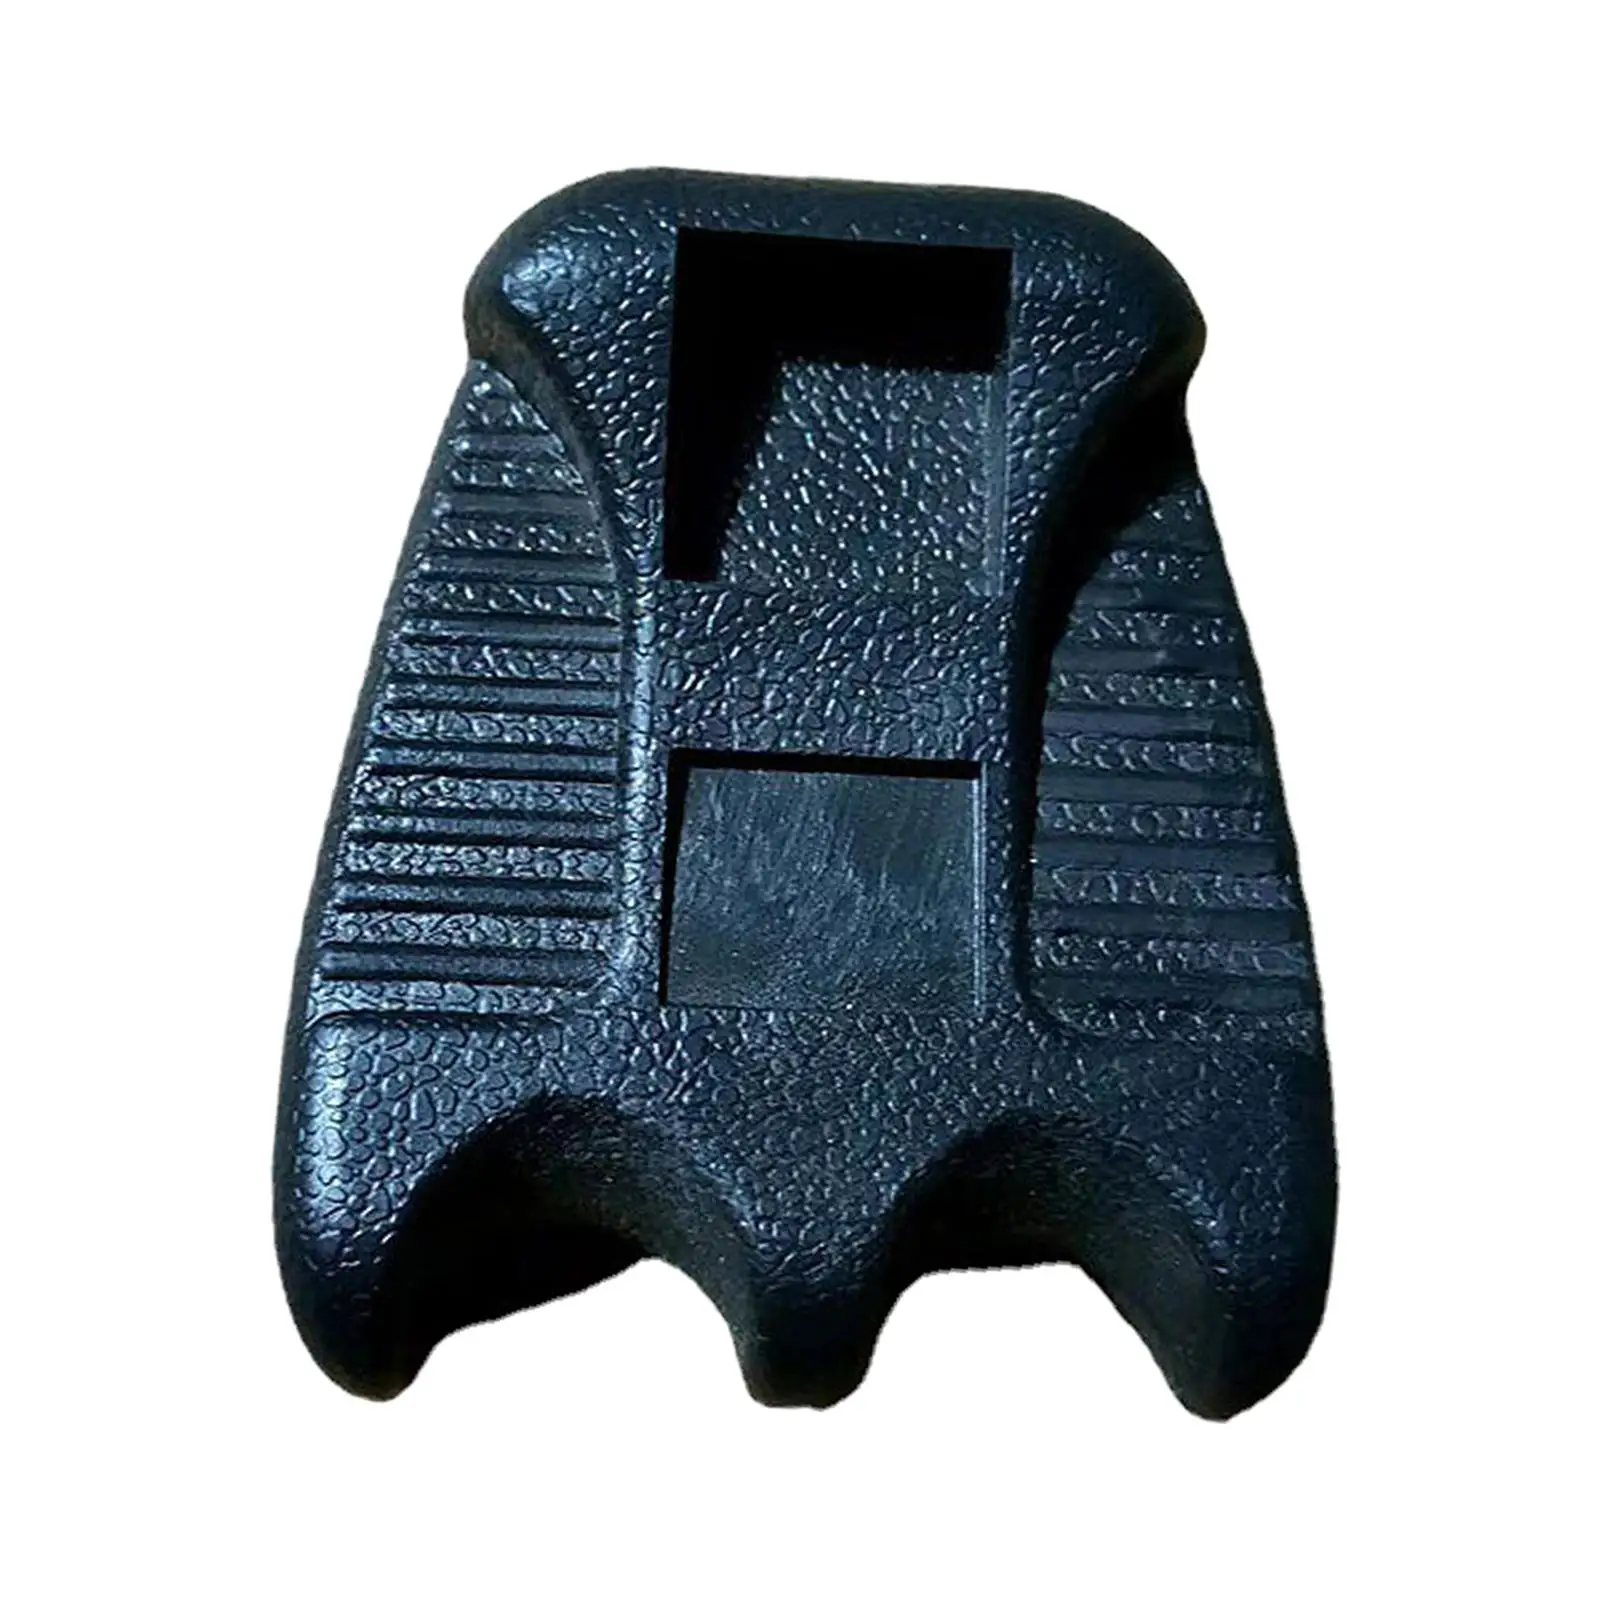 Pool Cue Holder Claw for Pool Cues Pool Stick Holder Pool Bars Clubs Billiards Rod Holder Billiard Cue Holder Snooker Cue Rest